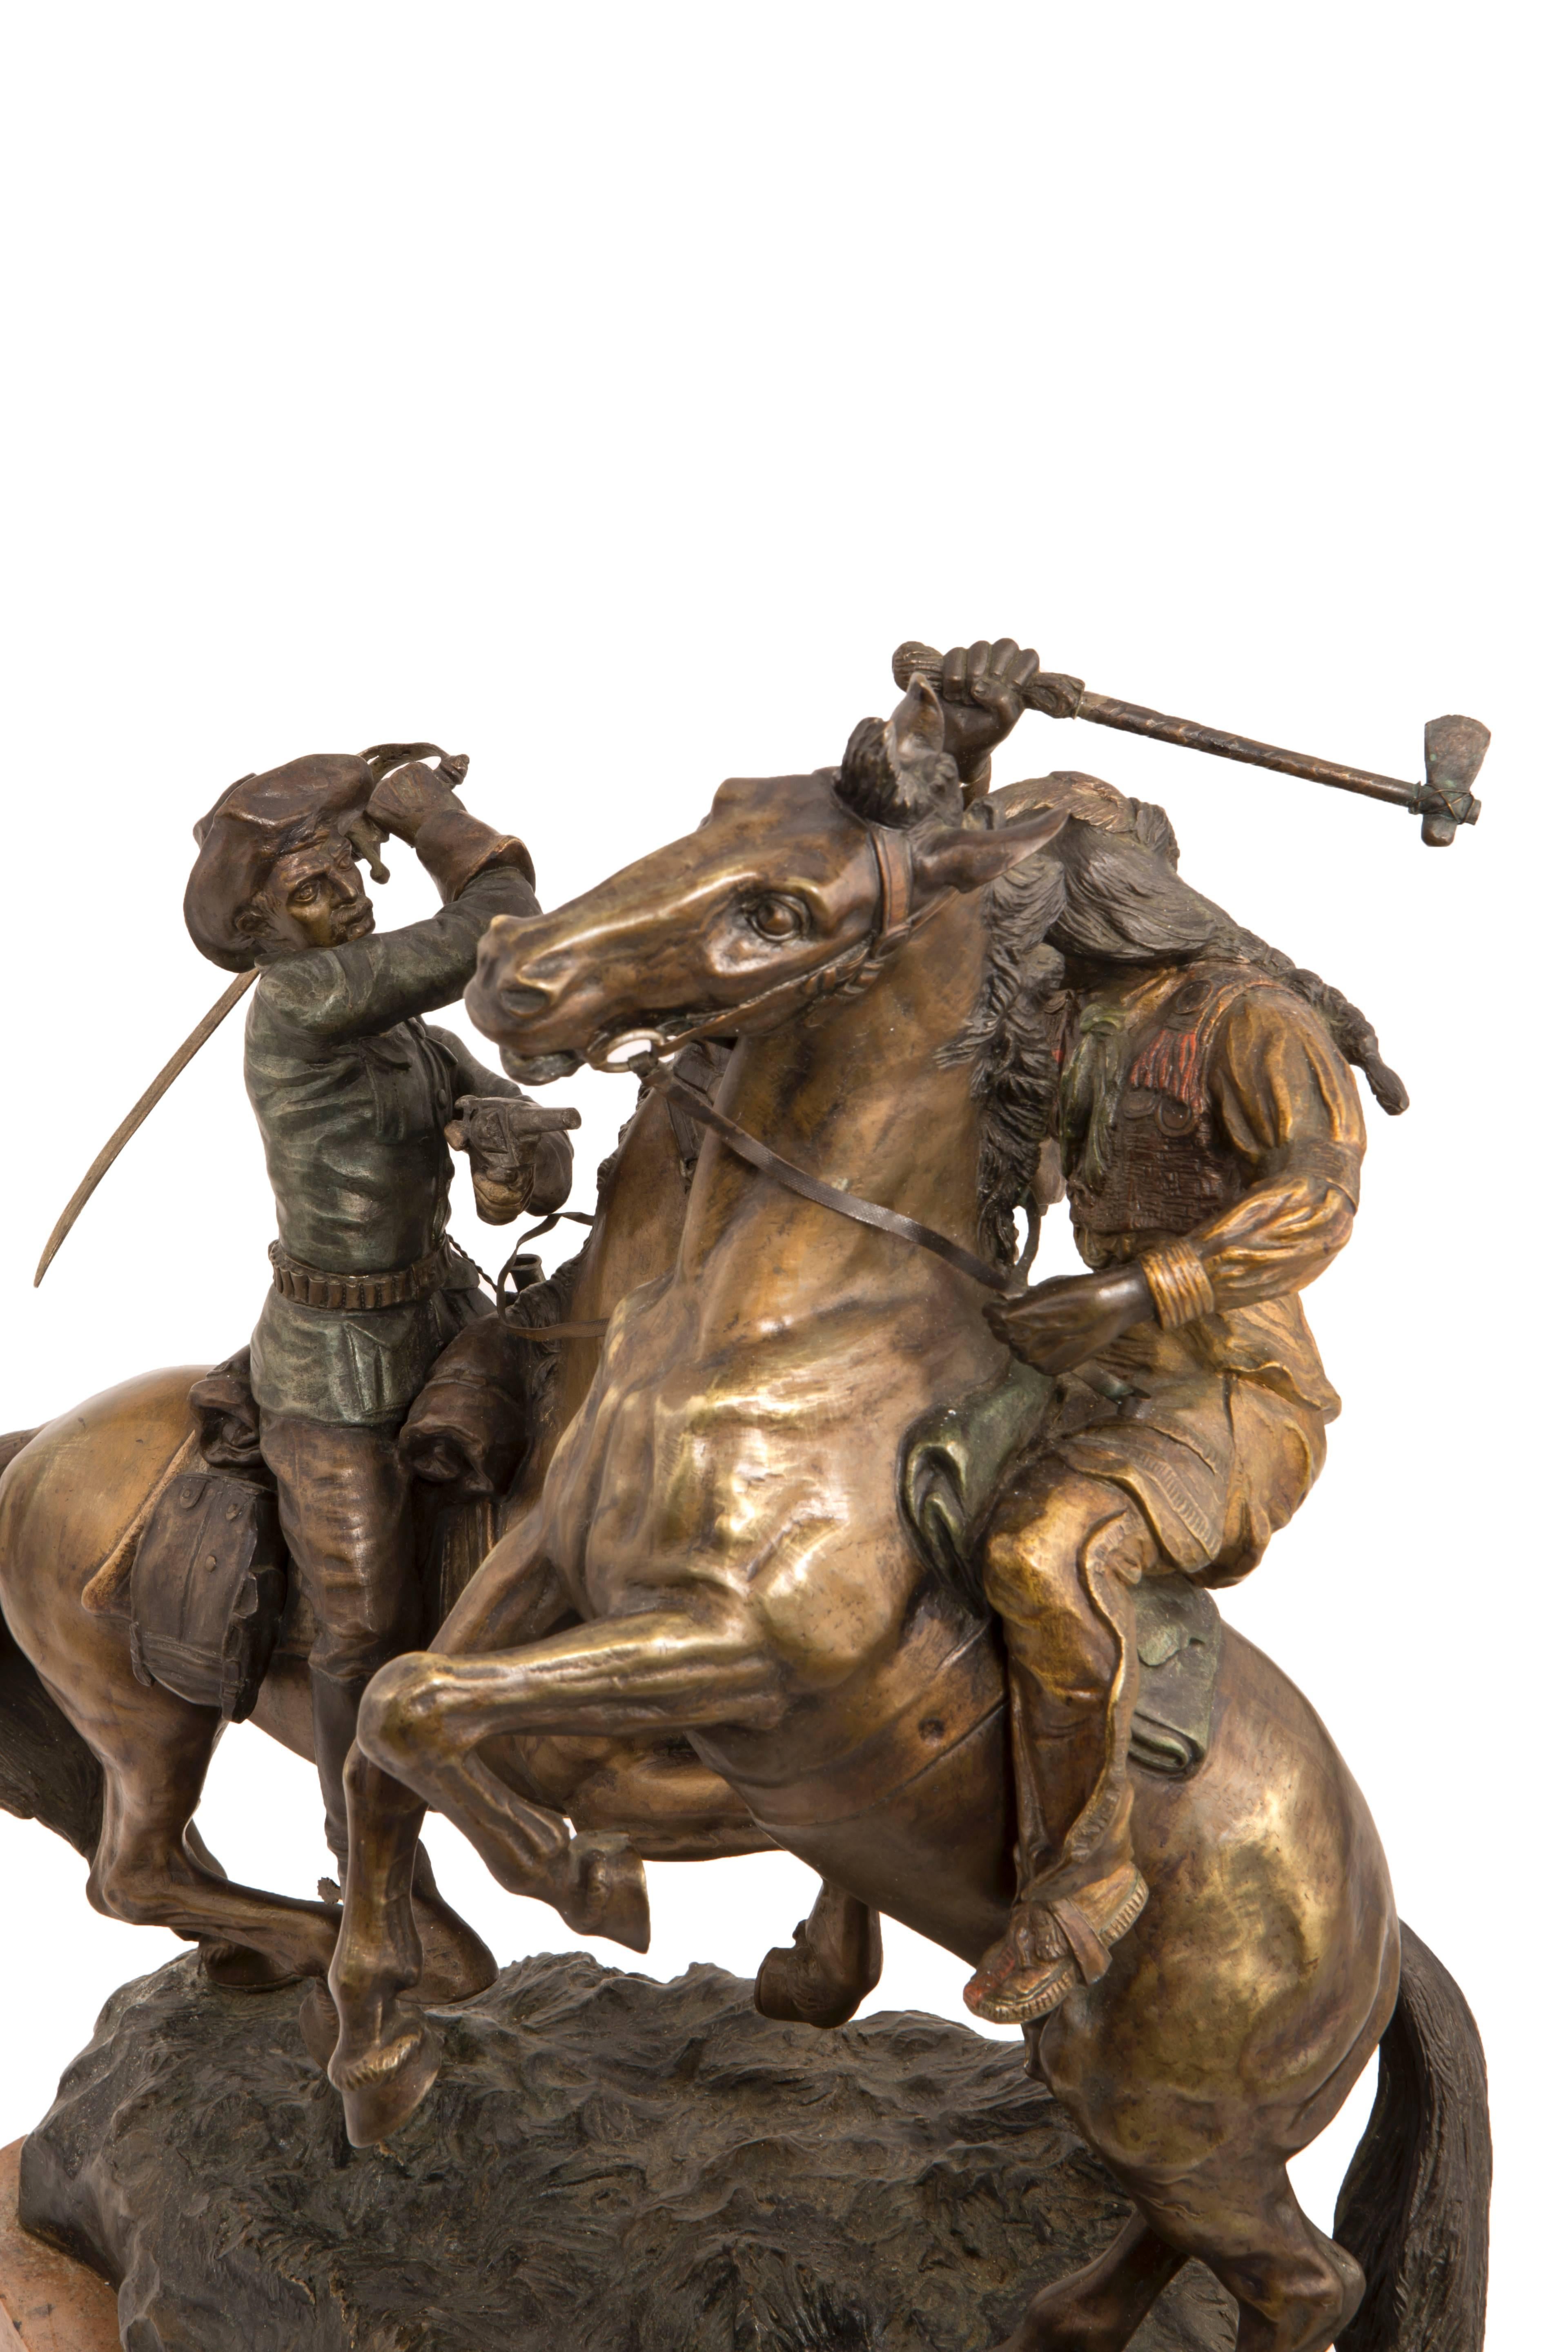 Polychromed Cowboy and Indian Sculpture by, Carl Kauba